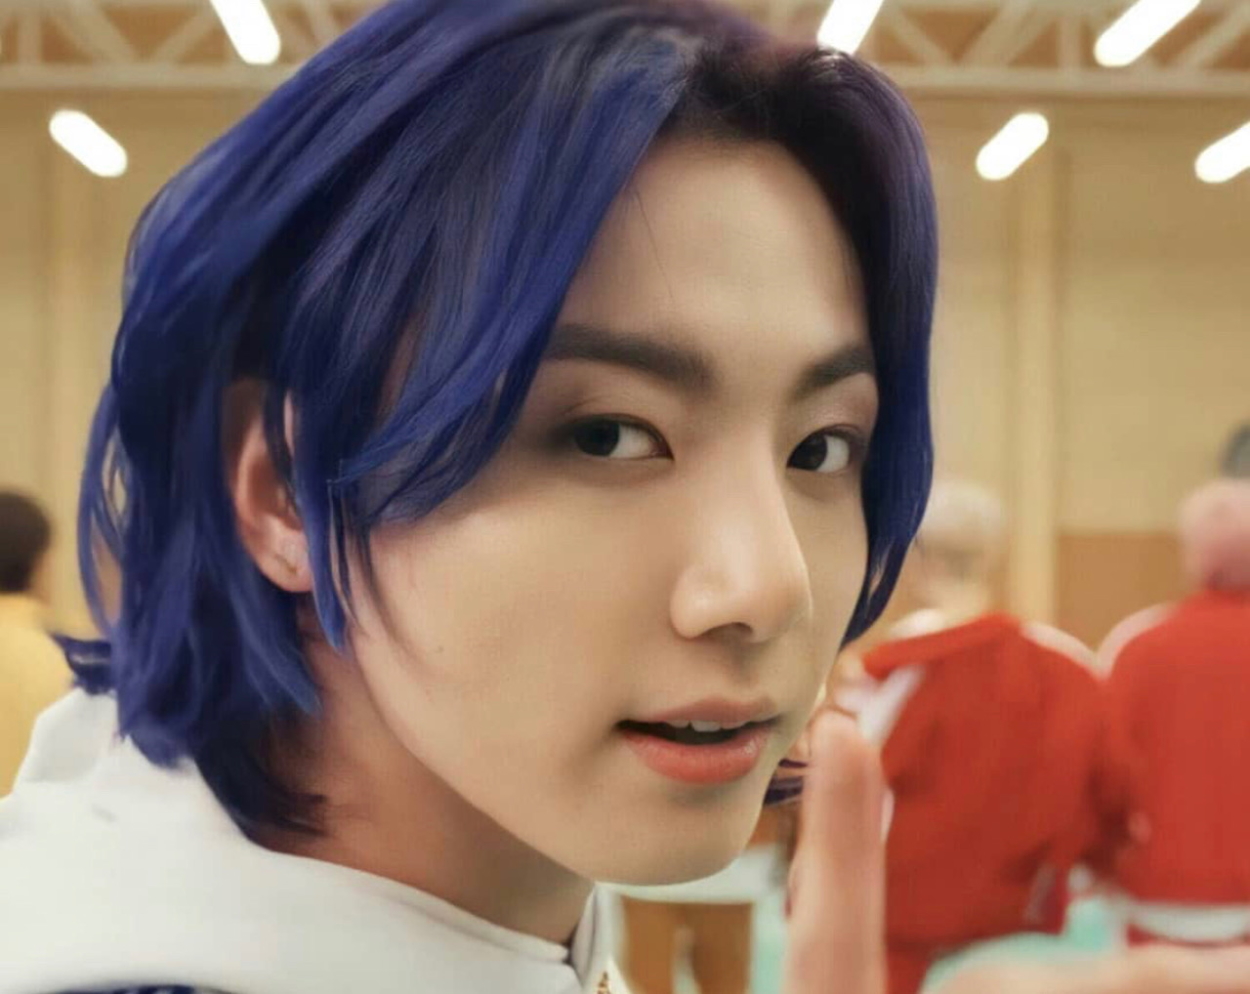 BTS Jungkook's Blue Hair Moments: From "No More Dream" to "Butter" - wide 2